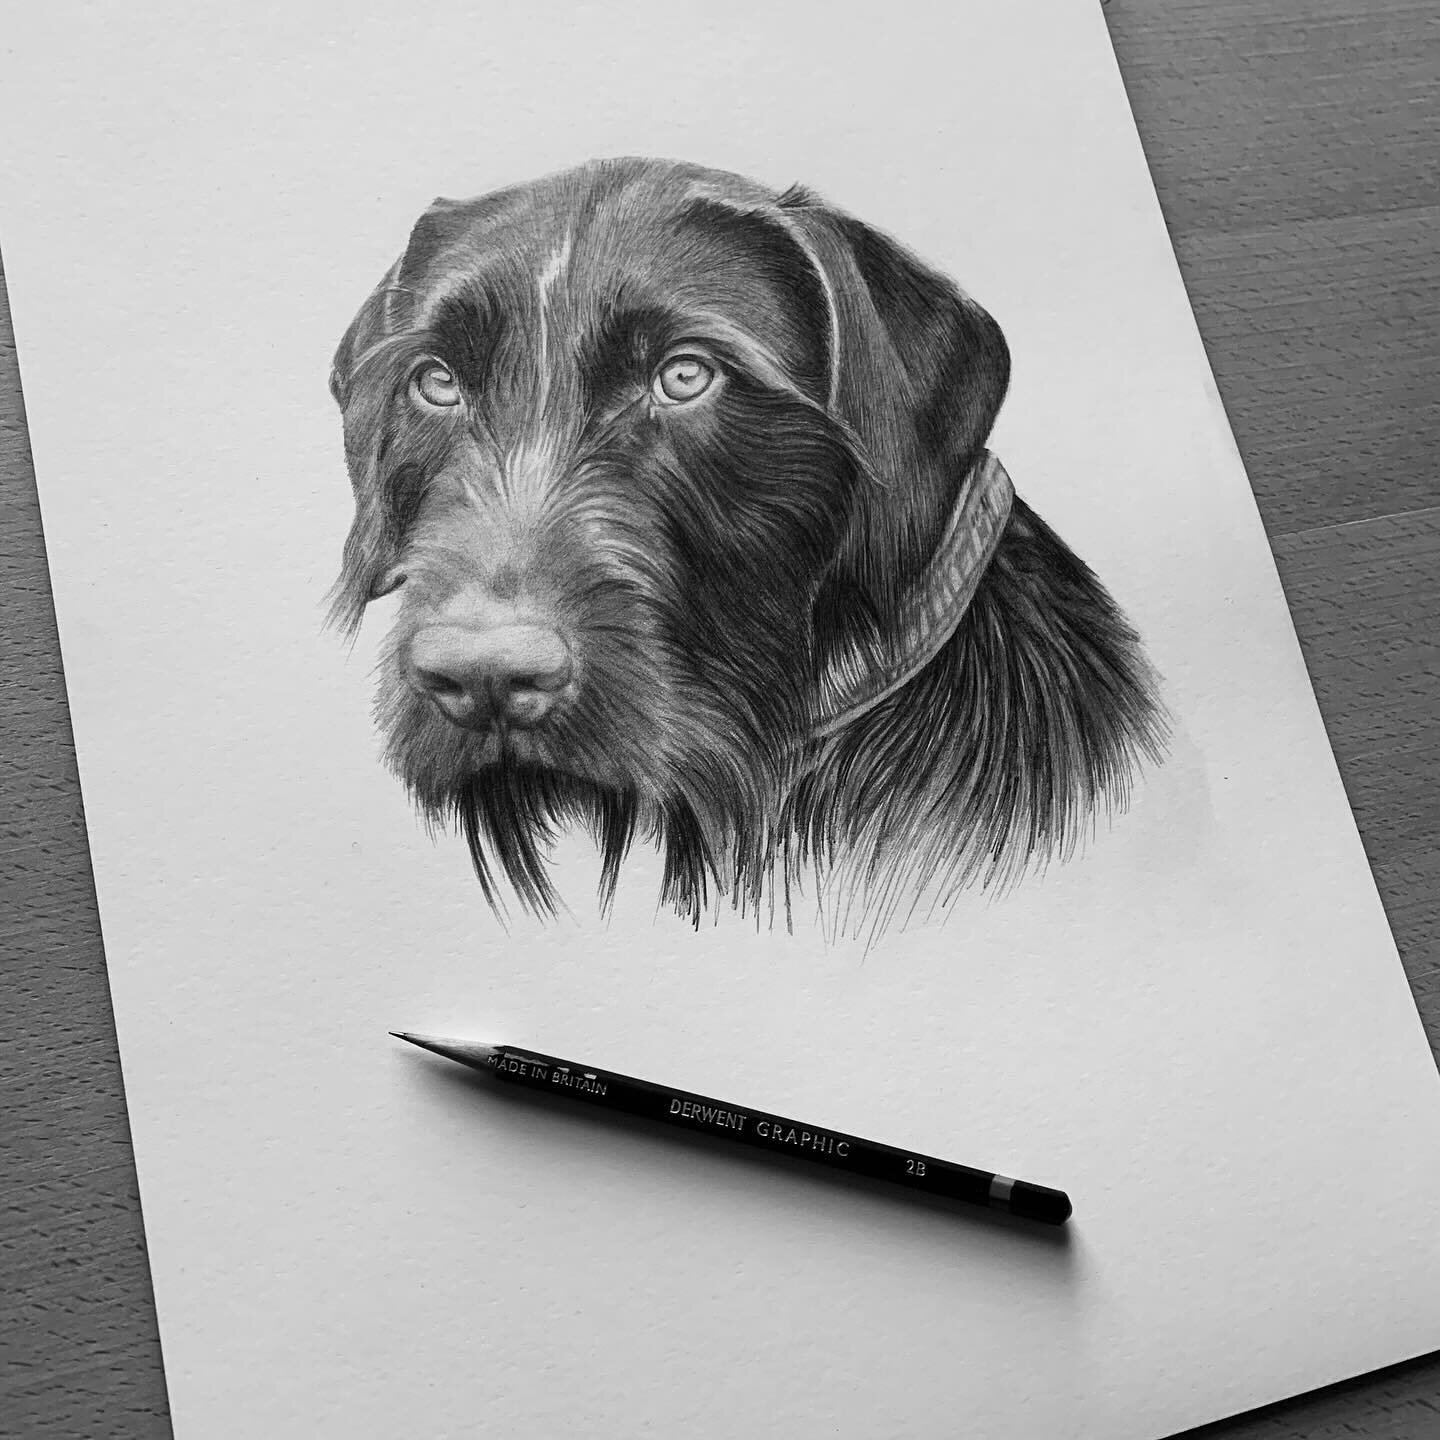 Bracken - German wirehaired pointer 🐕 

Graphite pencil on paper.

2024 commissions are filling up so please get in touch if you&rsquo;d like to order!

#germanwirehairedpointer #dogs #dogportrait #dogportraits #petportrait #petportraits #petportrai